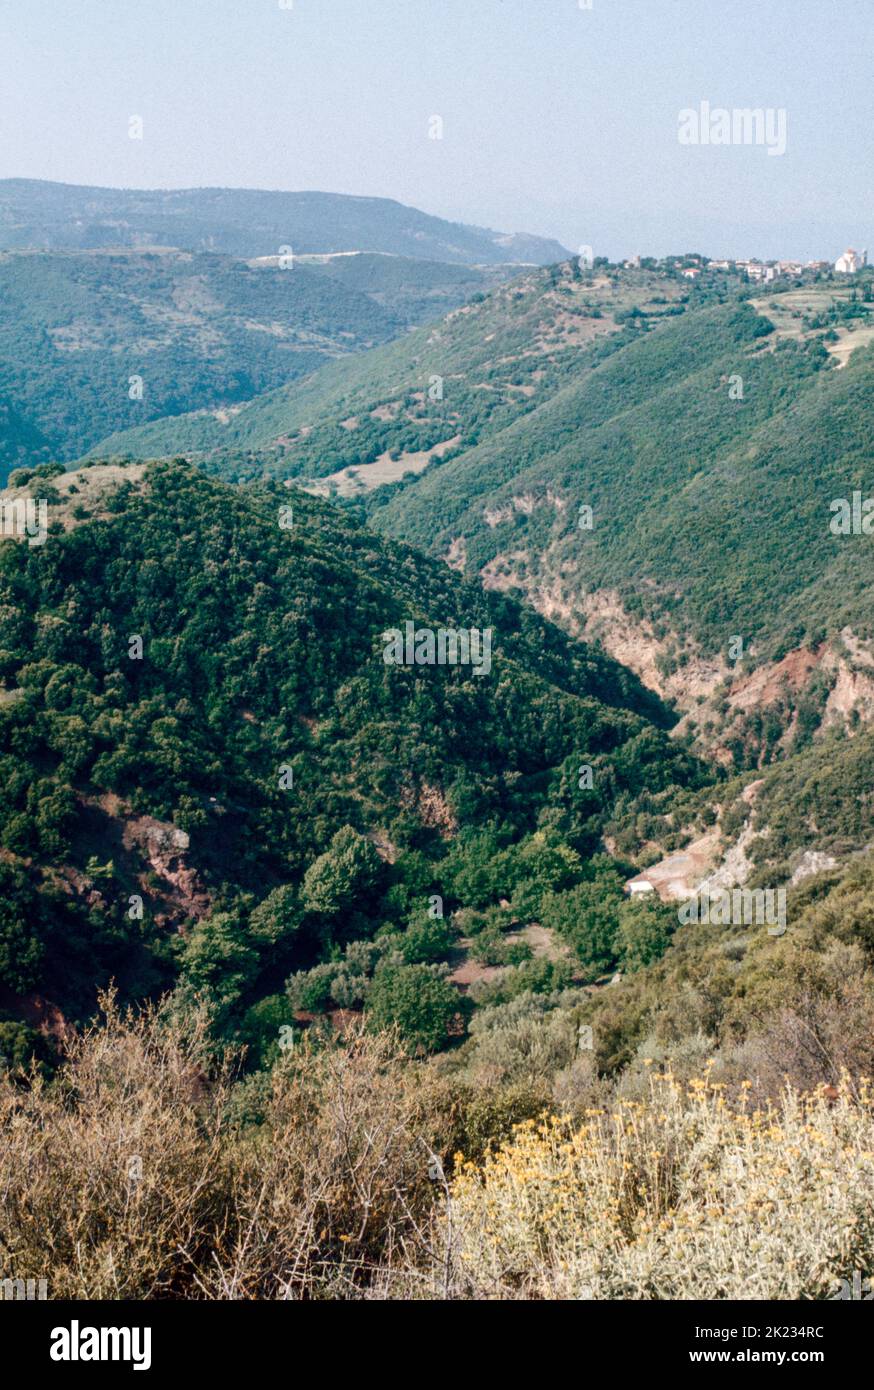 Arcadia highlands - region in the central Peloponnese. It takes its name from the mythological character Arcas, and in Greek mythology it was the home of the gods Hermes and Pan. March 1980. Archival scan from a slide. Stock Photo